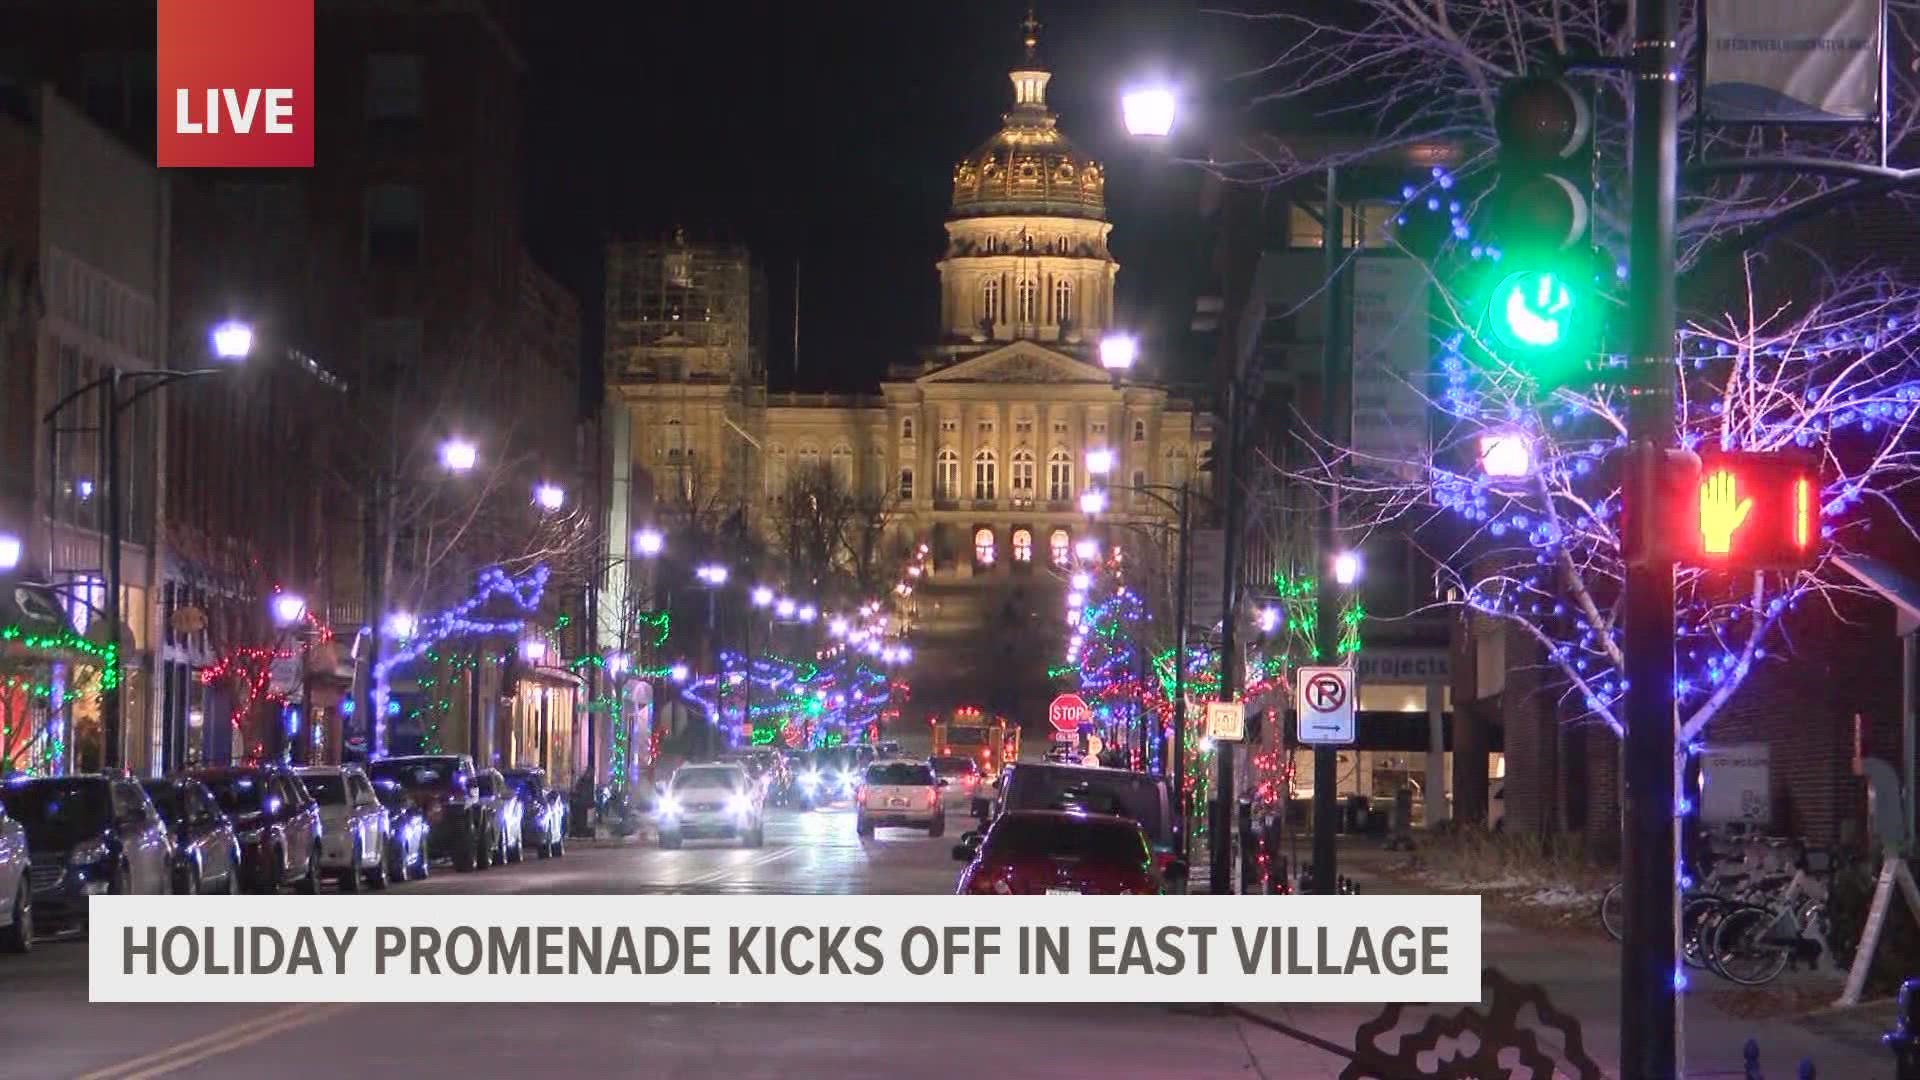 The Holiday Promenade will fill East Village with festive activities, entertainment and family fun next week on Nov. 25 as well as Dec. 2, 9 and 16.